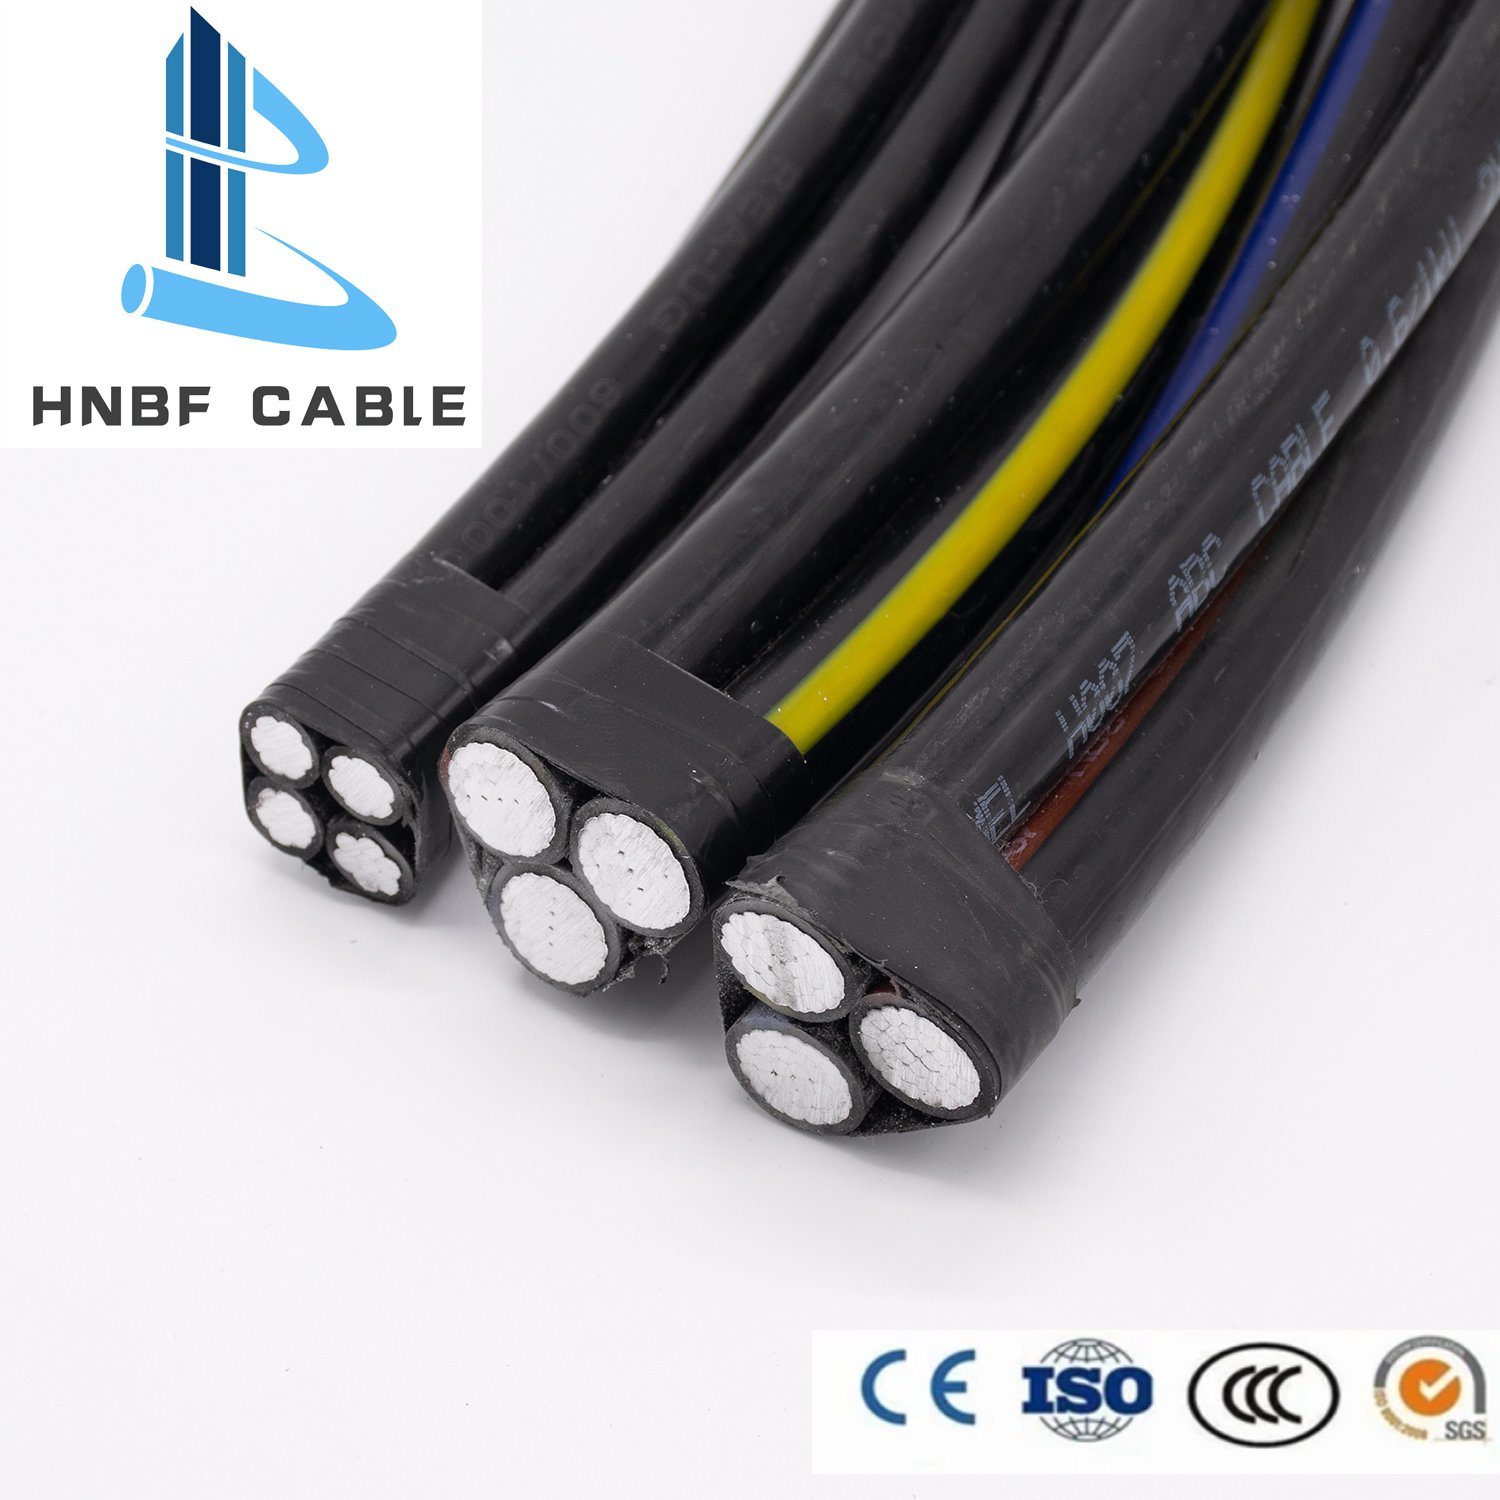 Factory Price AAAC Duplex Service Drop Cable ABC Cable 1*4AWG+4AWG Harrier Whippet